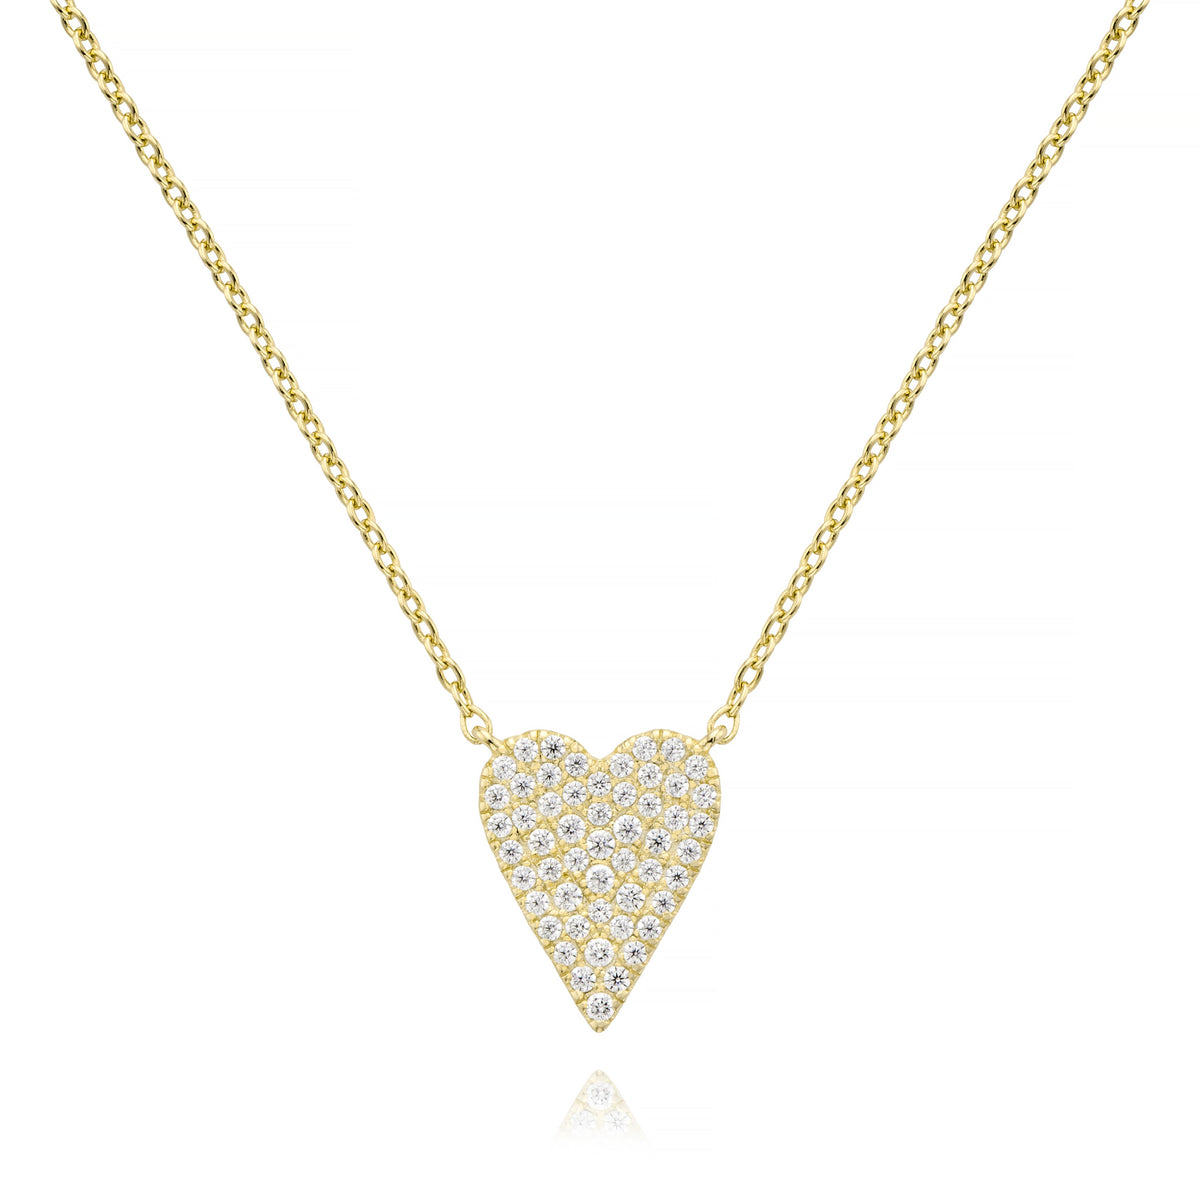 Sharp Heart Pave Necklace in Yellow